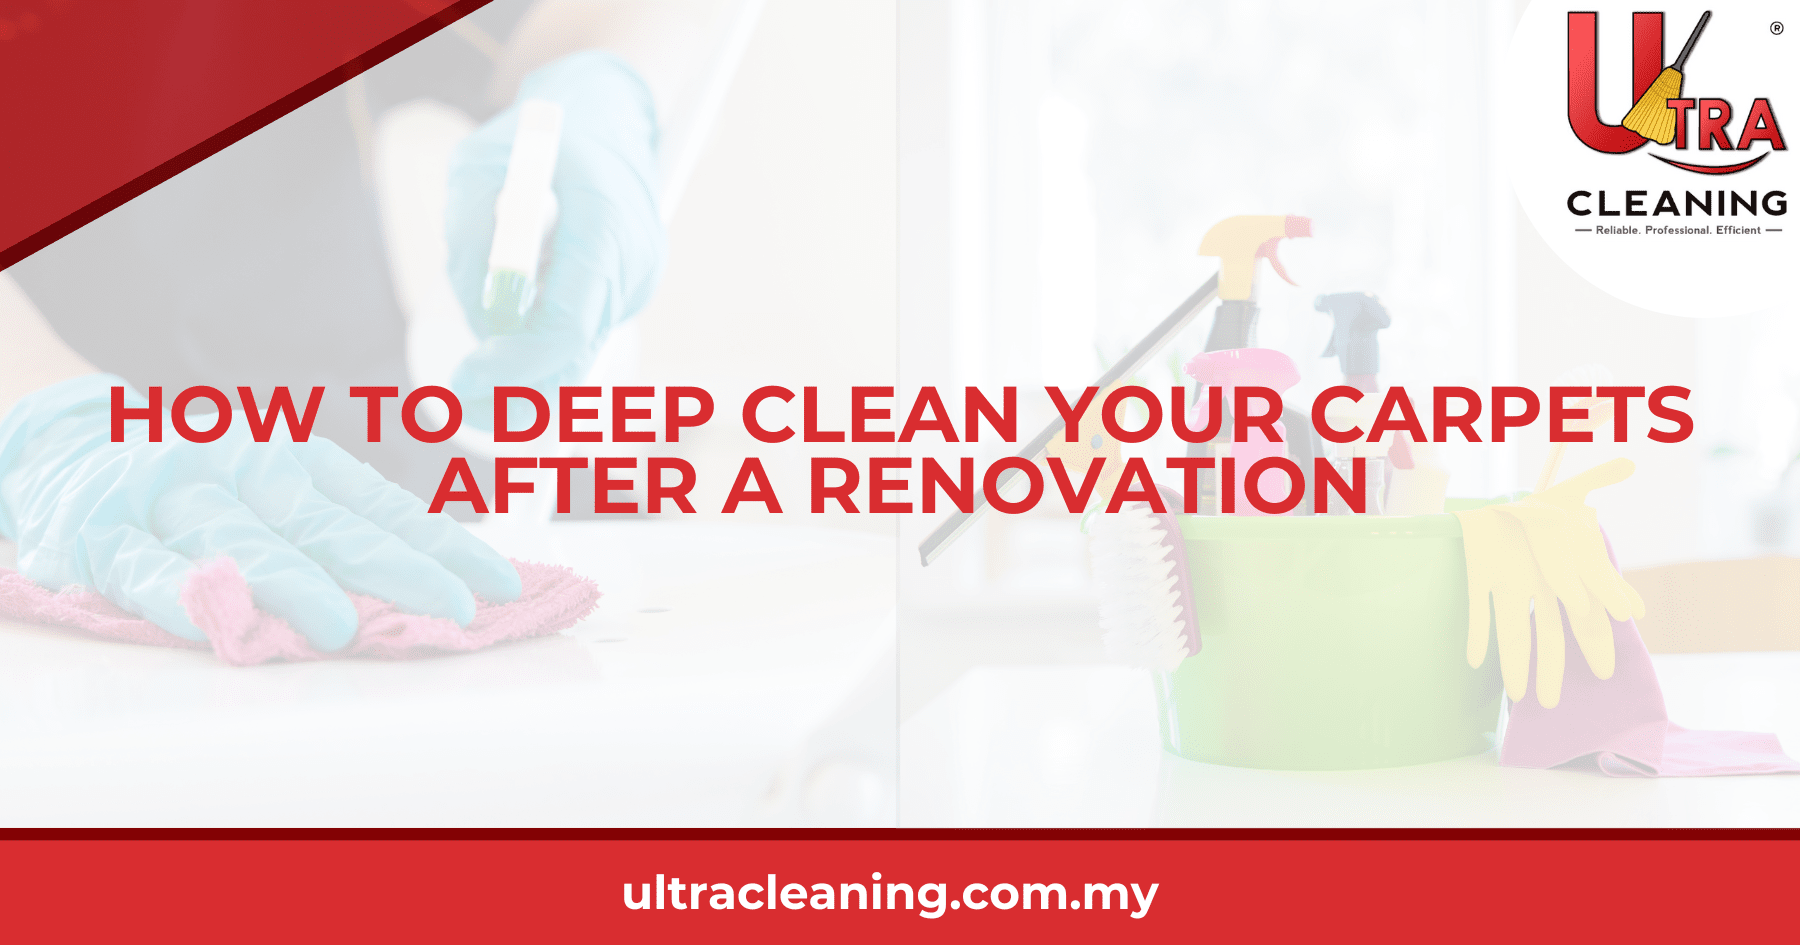 How to Deep Clean Your Carpets after a Renovation